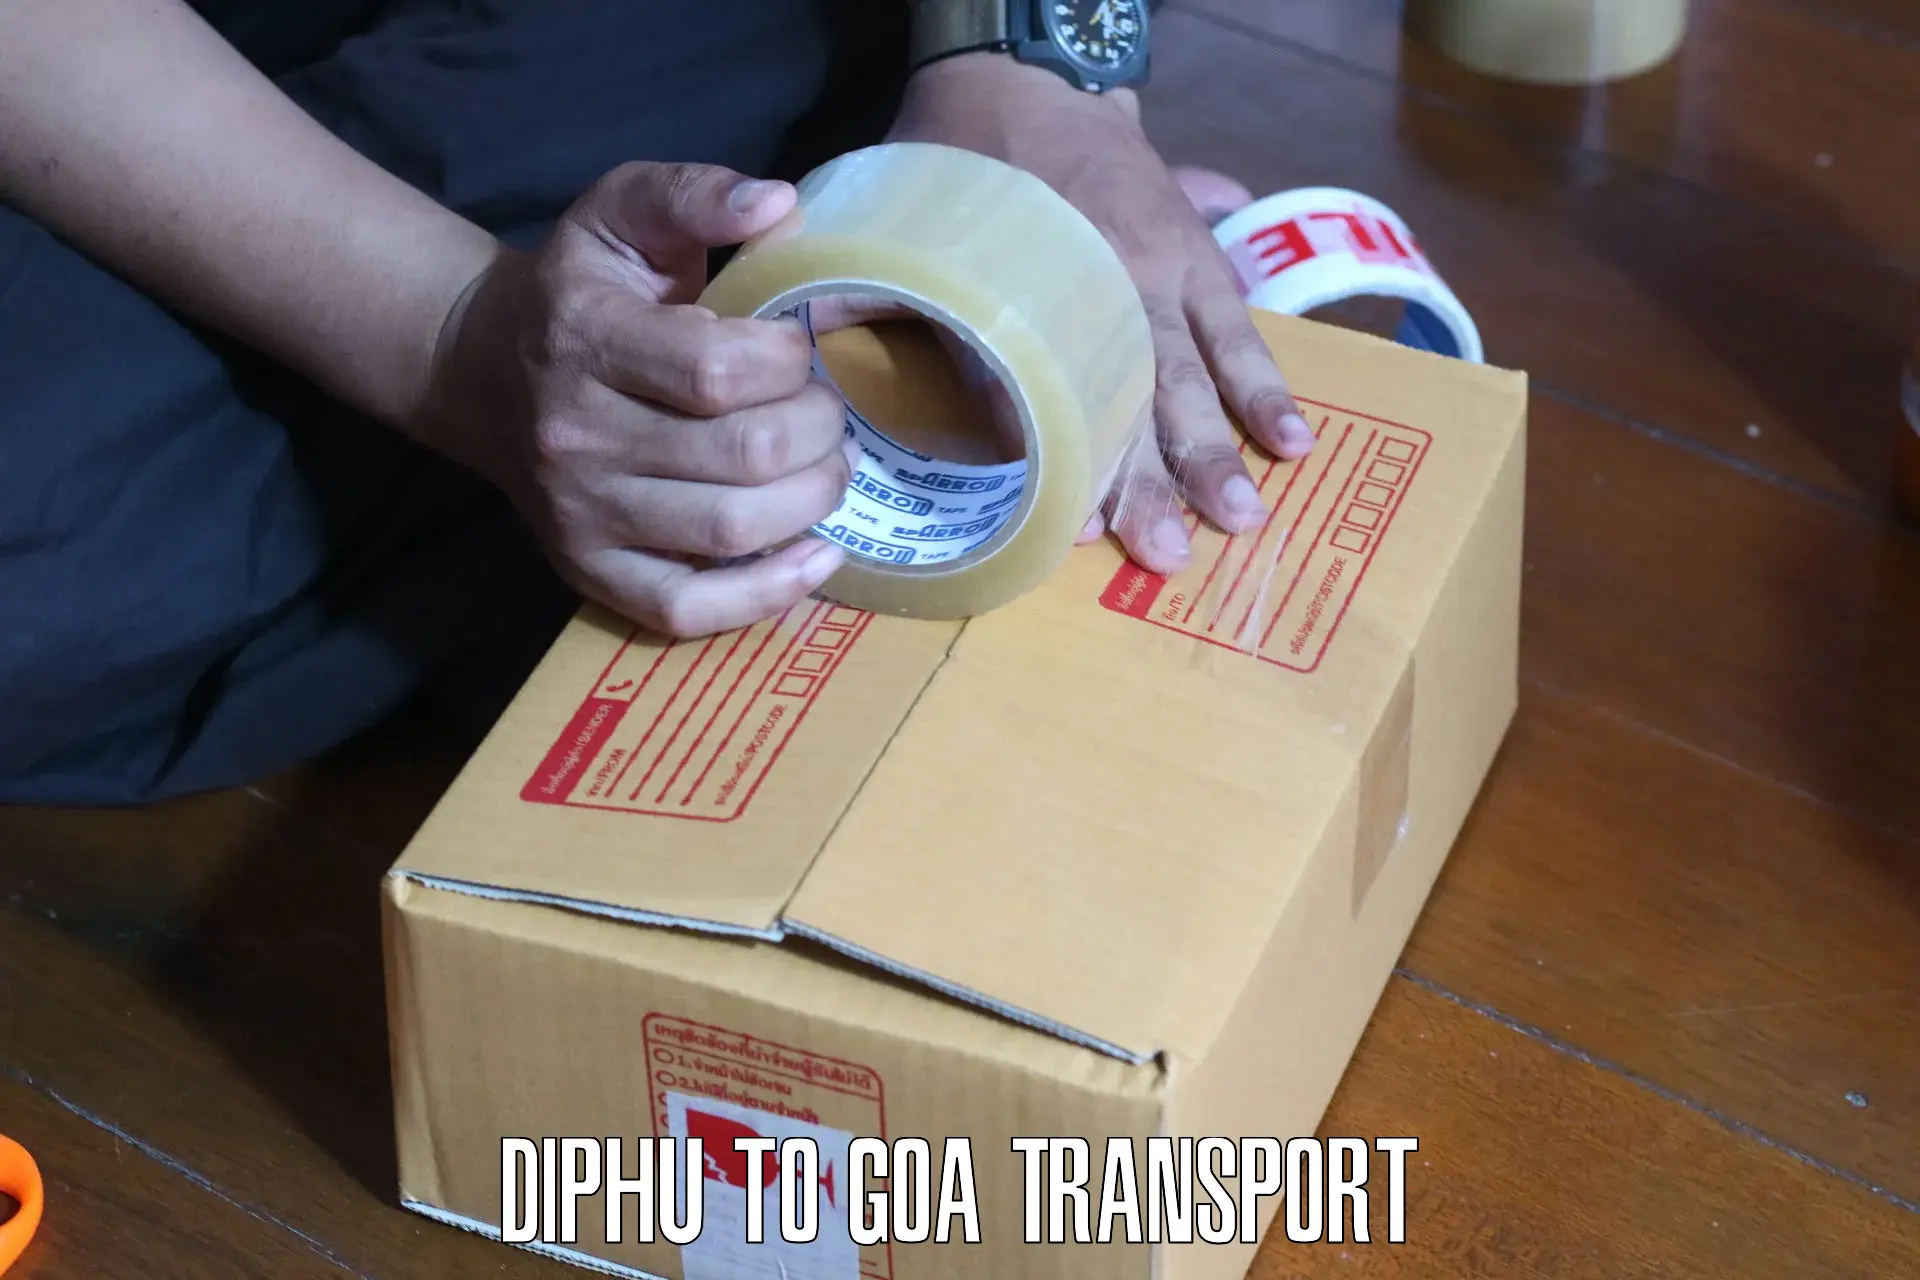 Container transport service Diphu to Goa